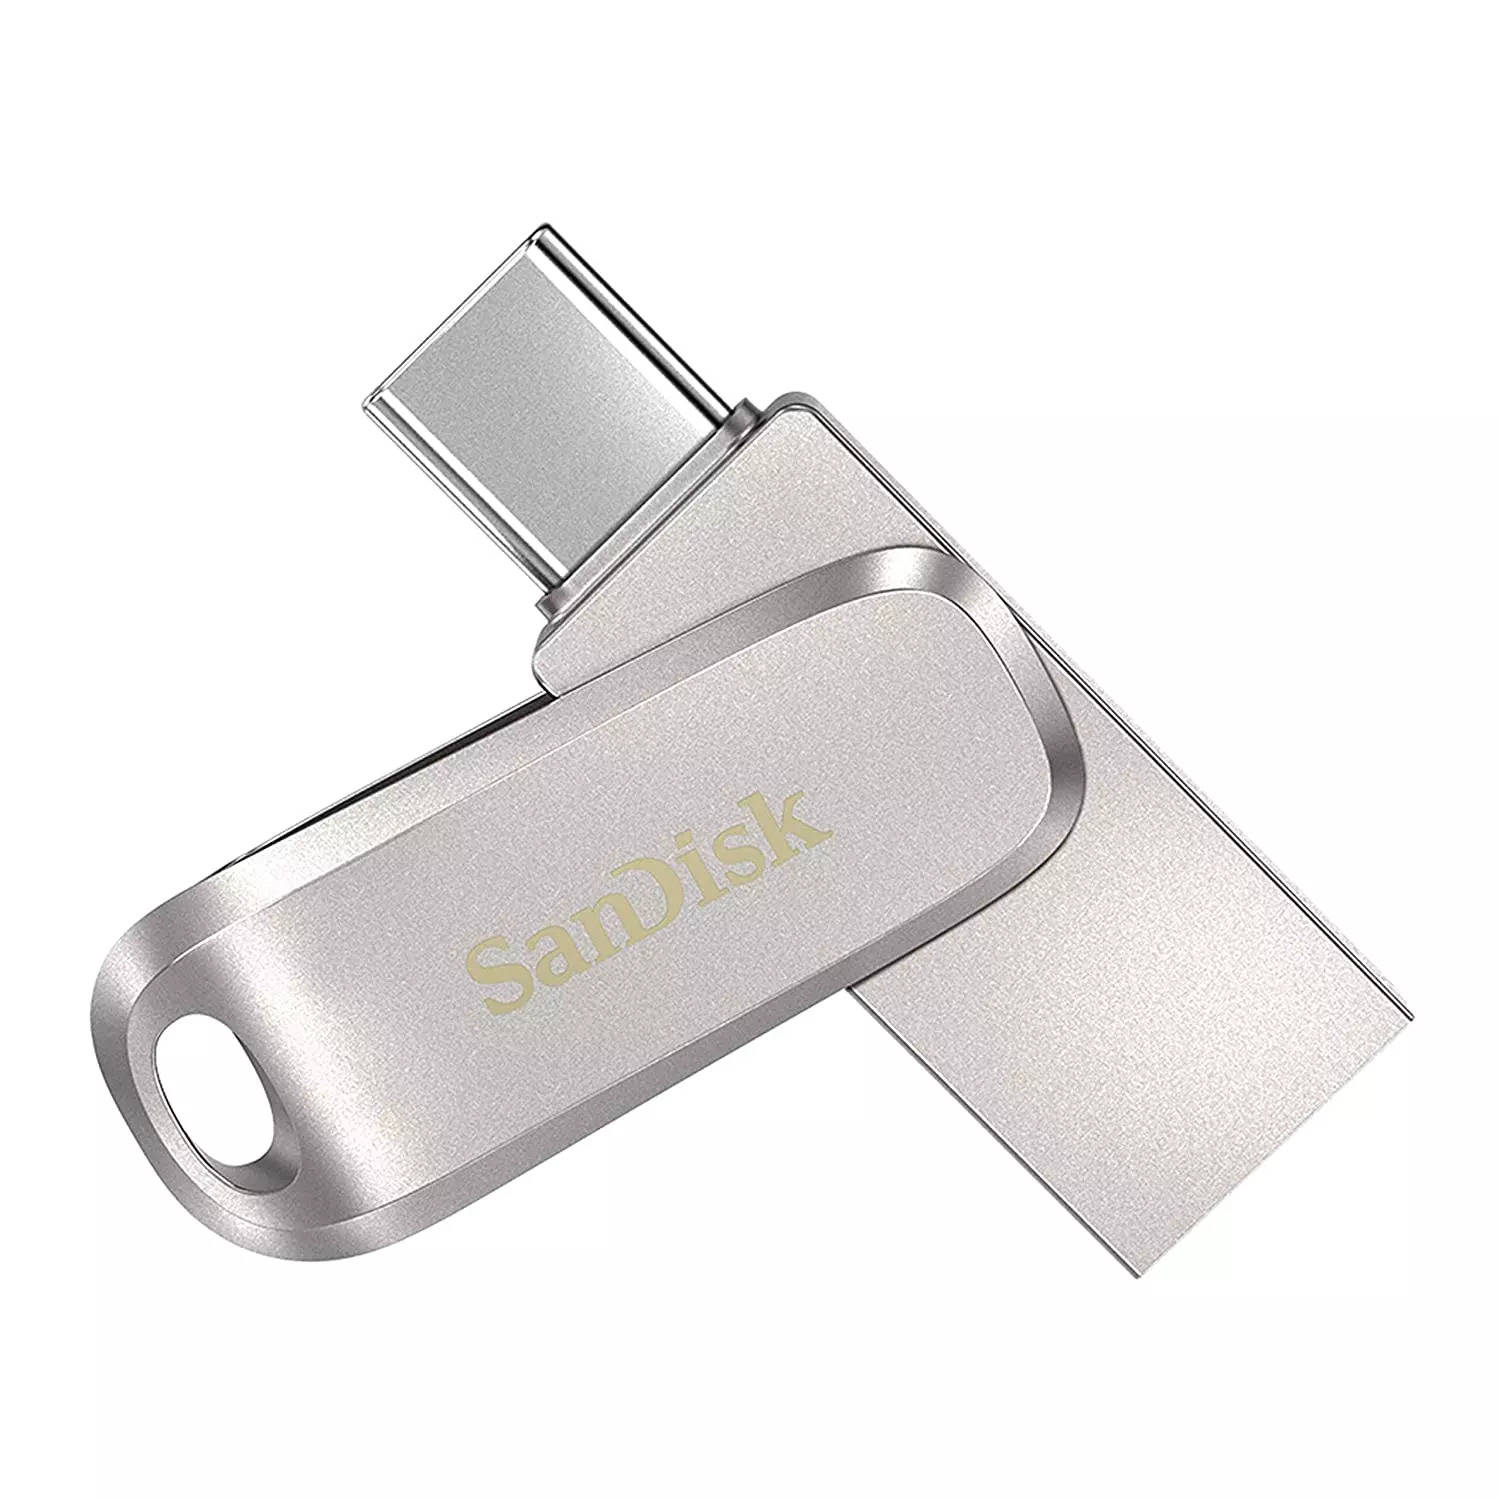 SanDisk 128 GB pendrive: Never Run Out of Storage Space Again with Sandisk  128 GB Pendrive - The Economic Times